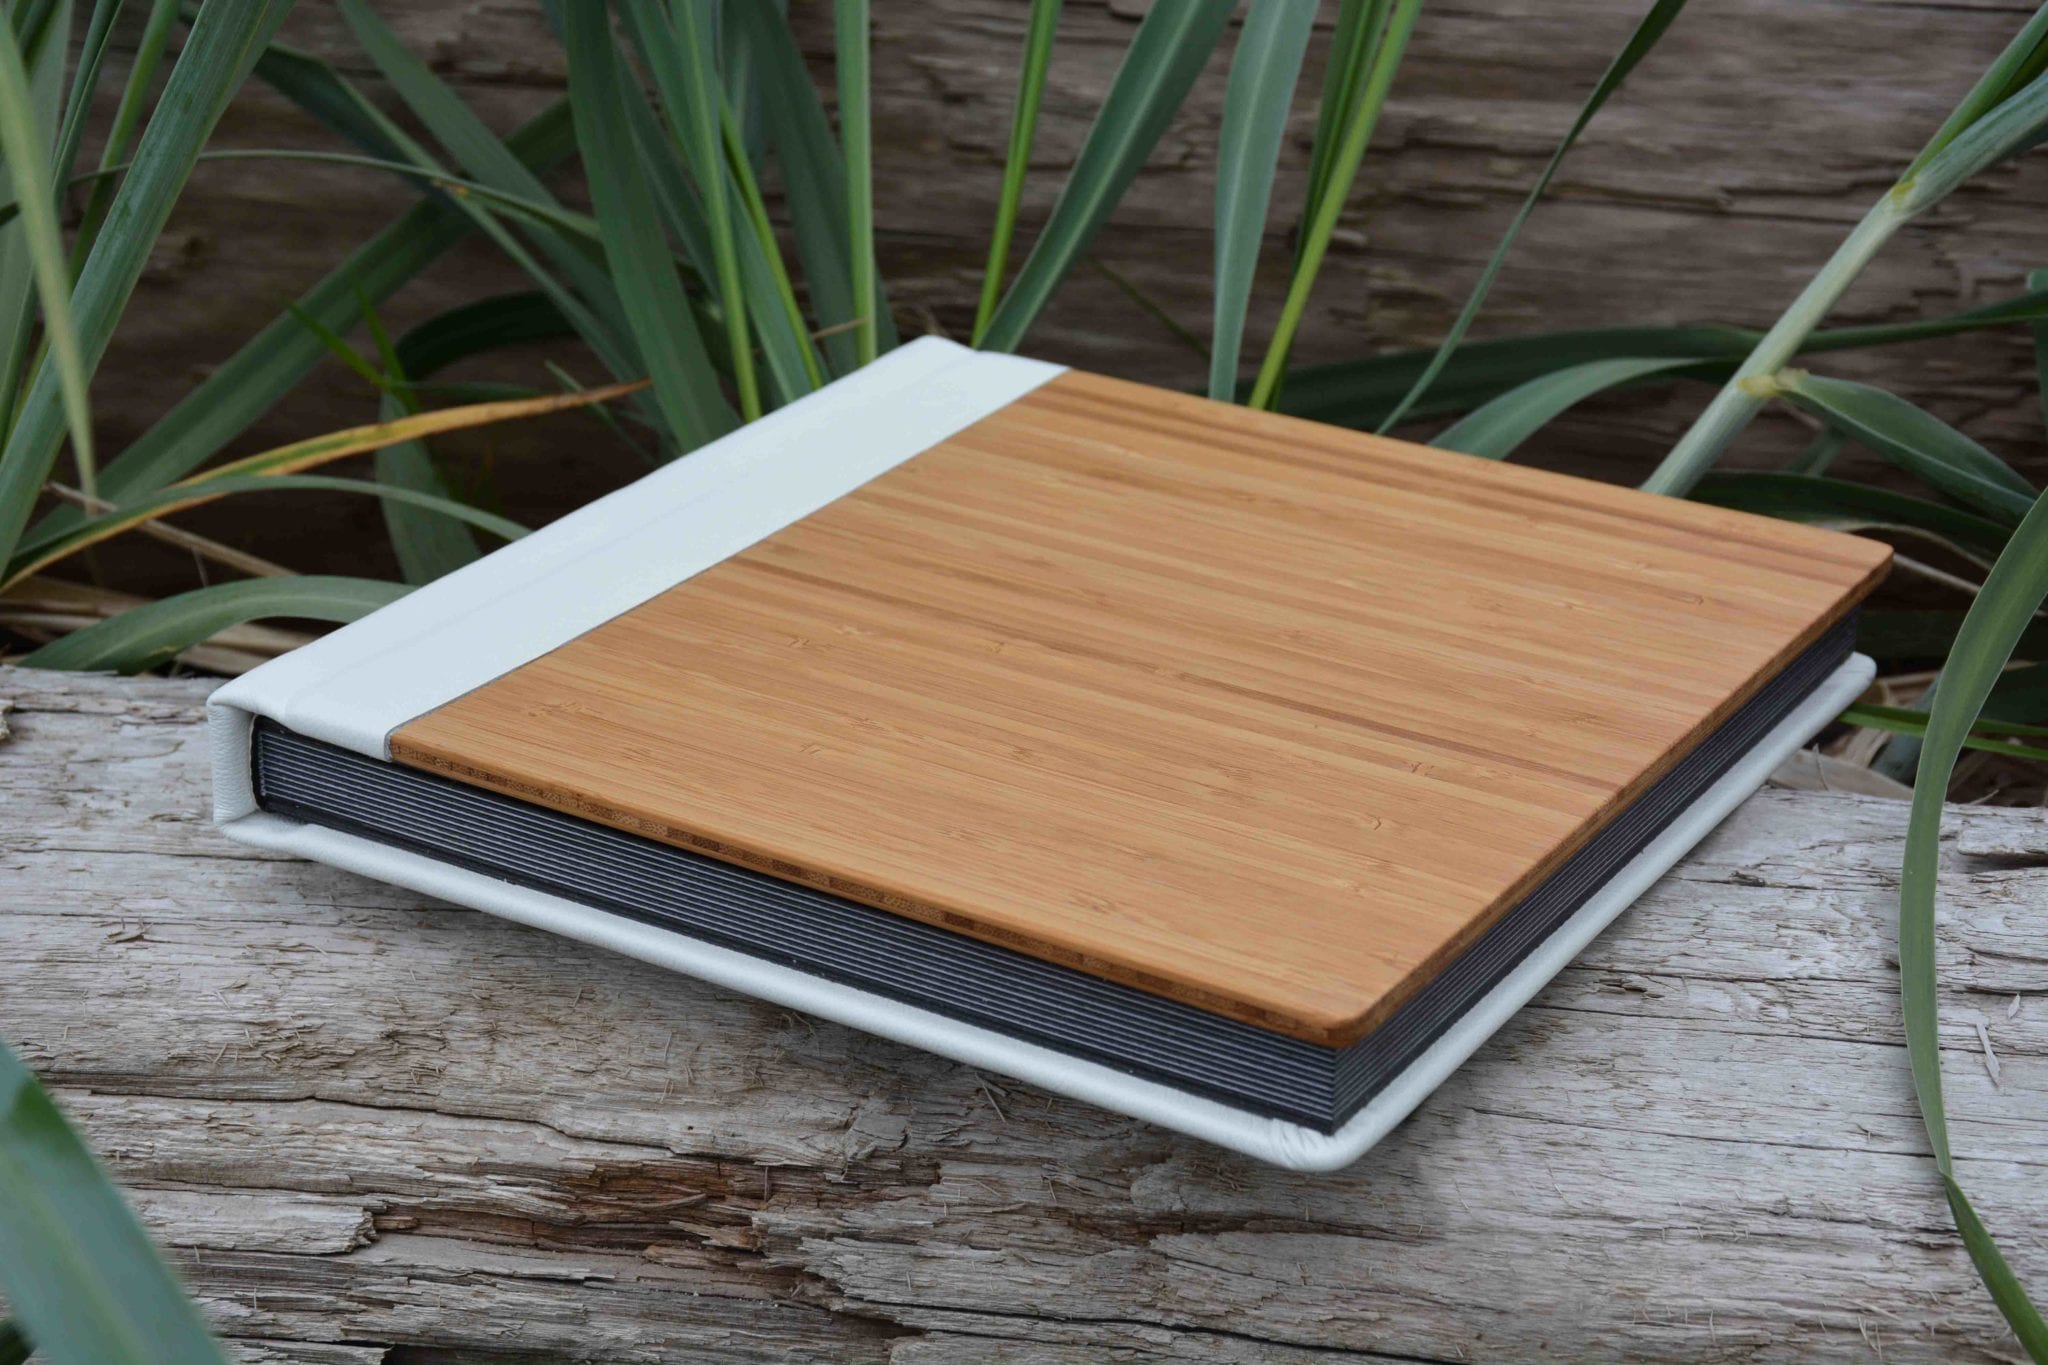 lifethreads albums bamboo cover with arctic white full grain leather